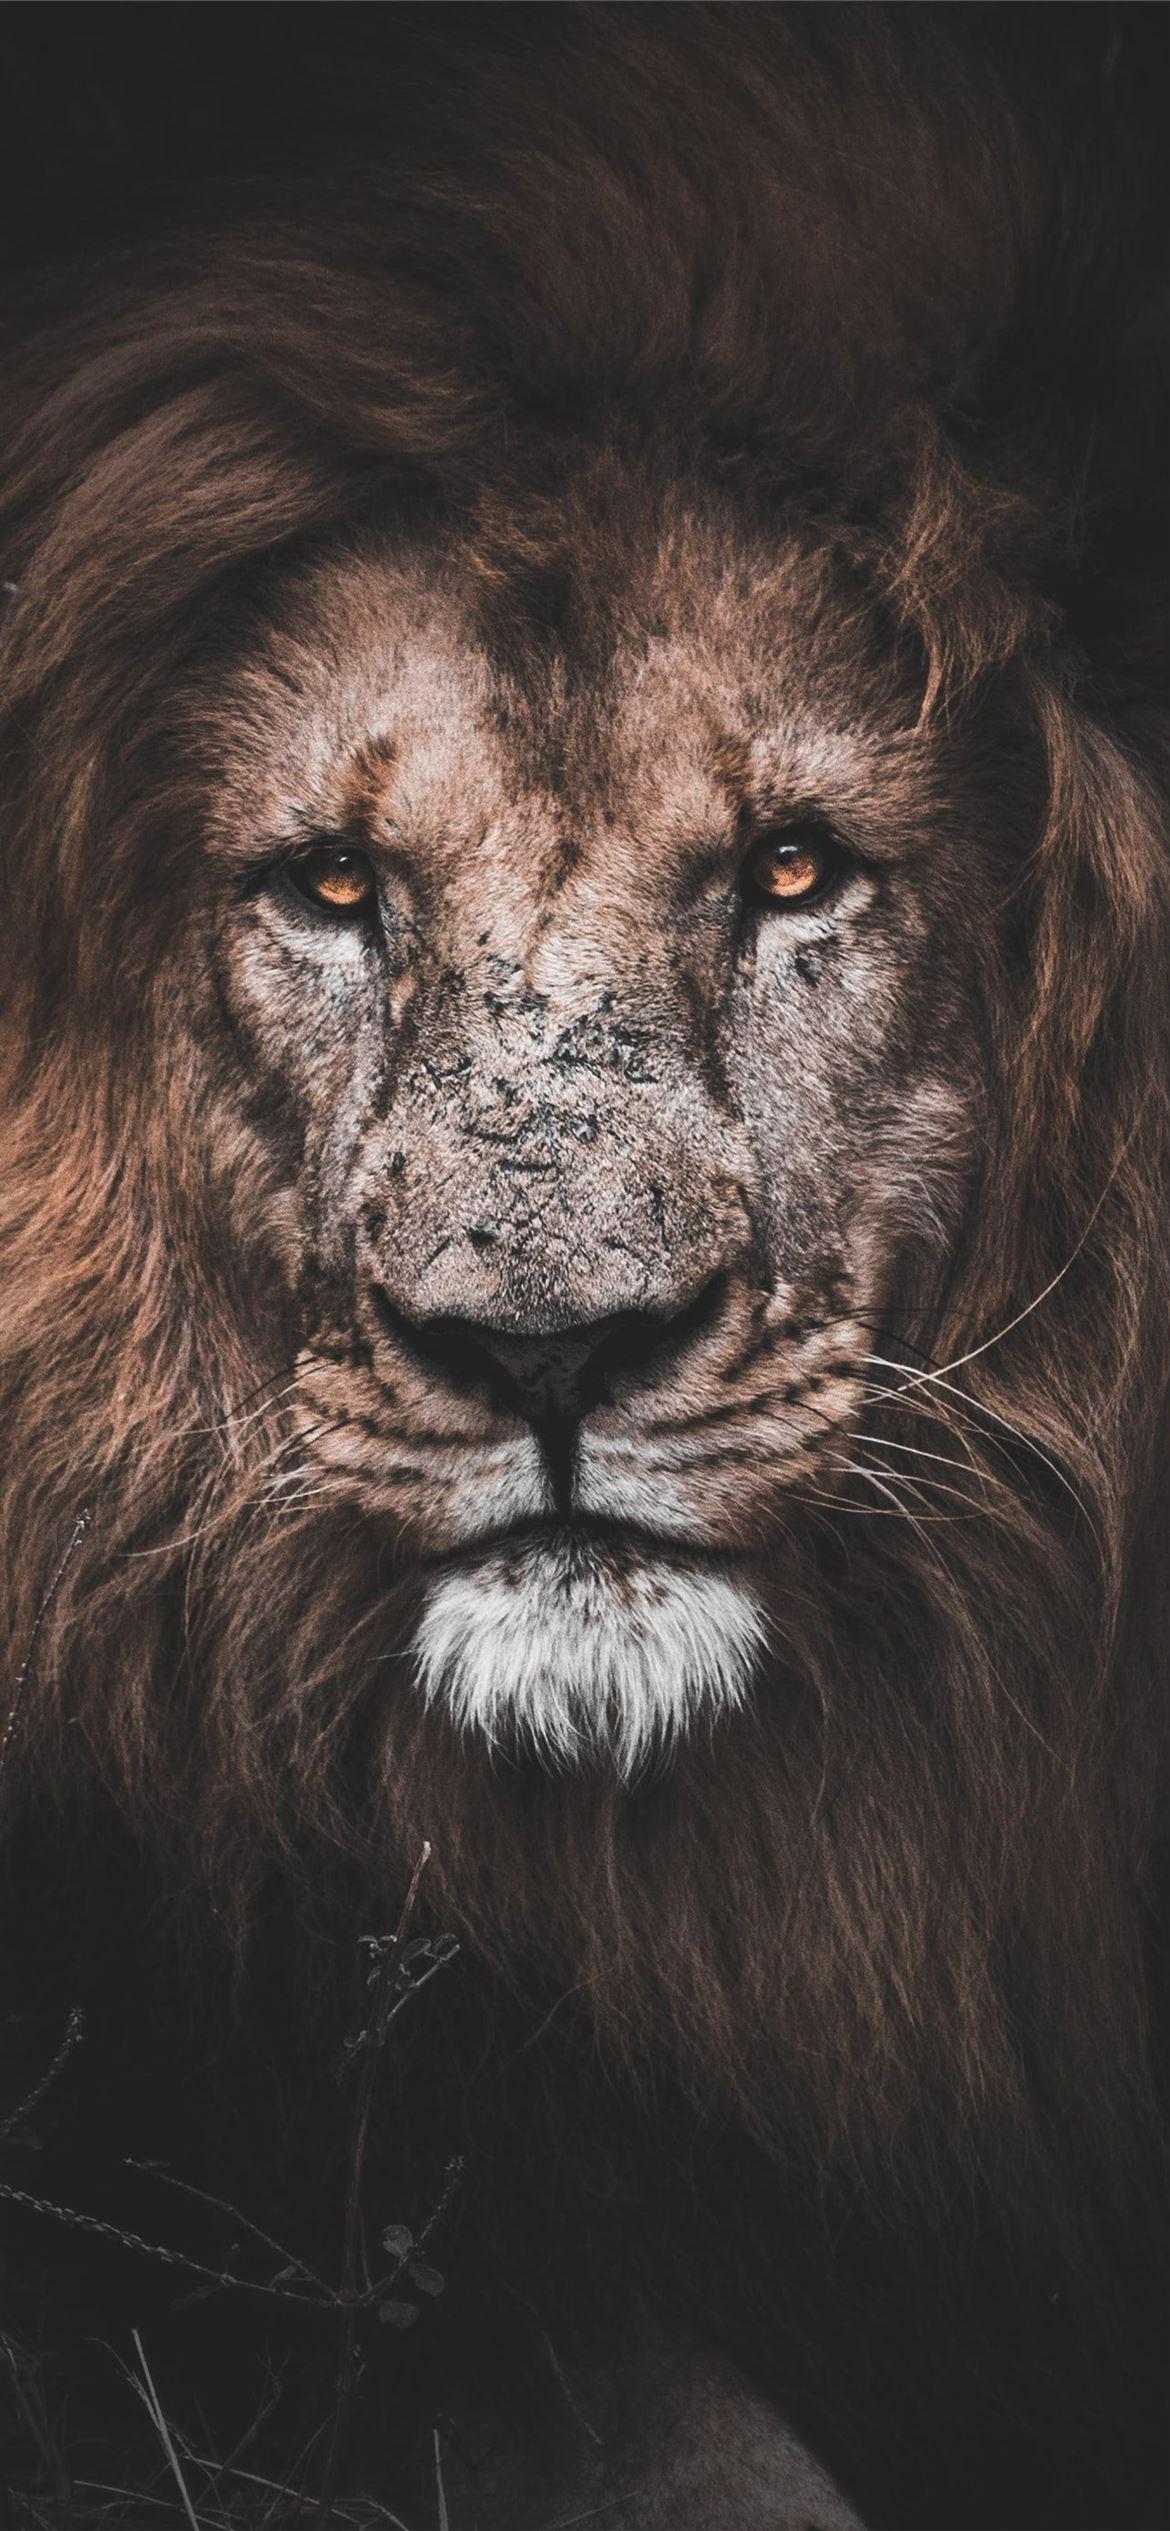 Lion Wallpaper Backgrounds 4k Hd, Leo Pictures Background Image And  Wallpaper for Free Download